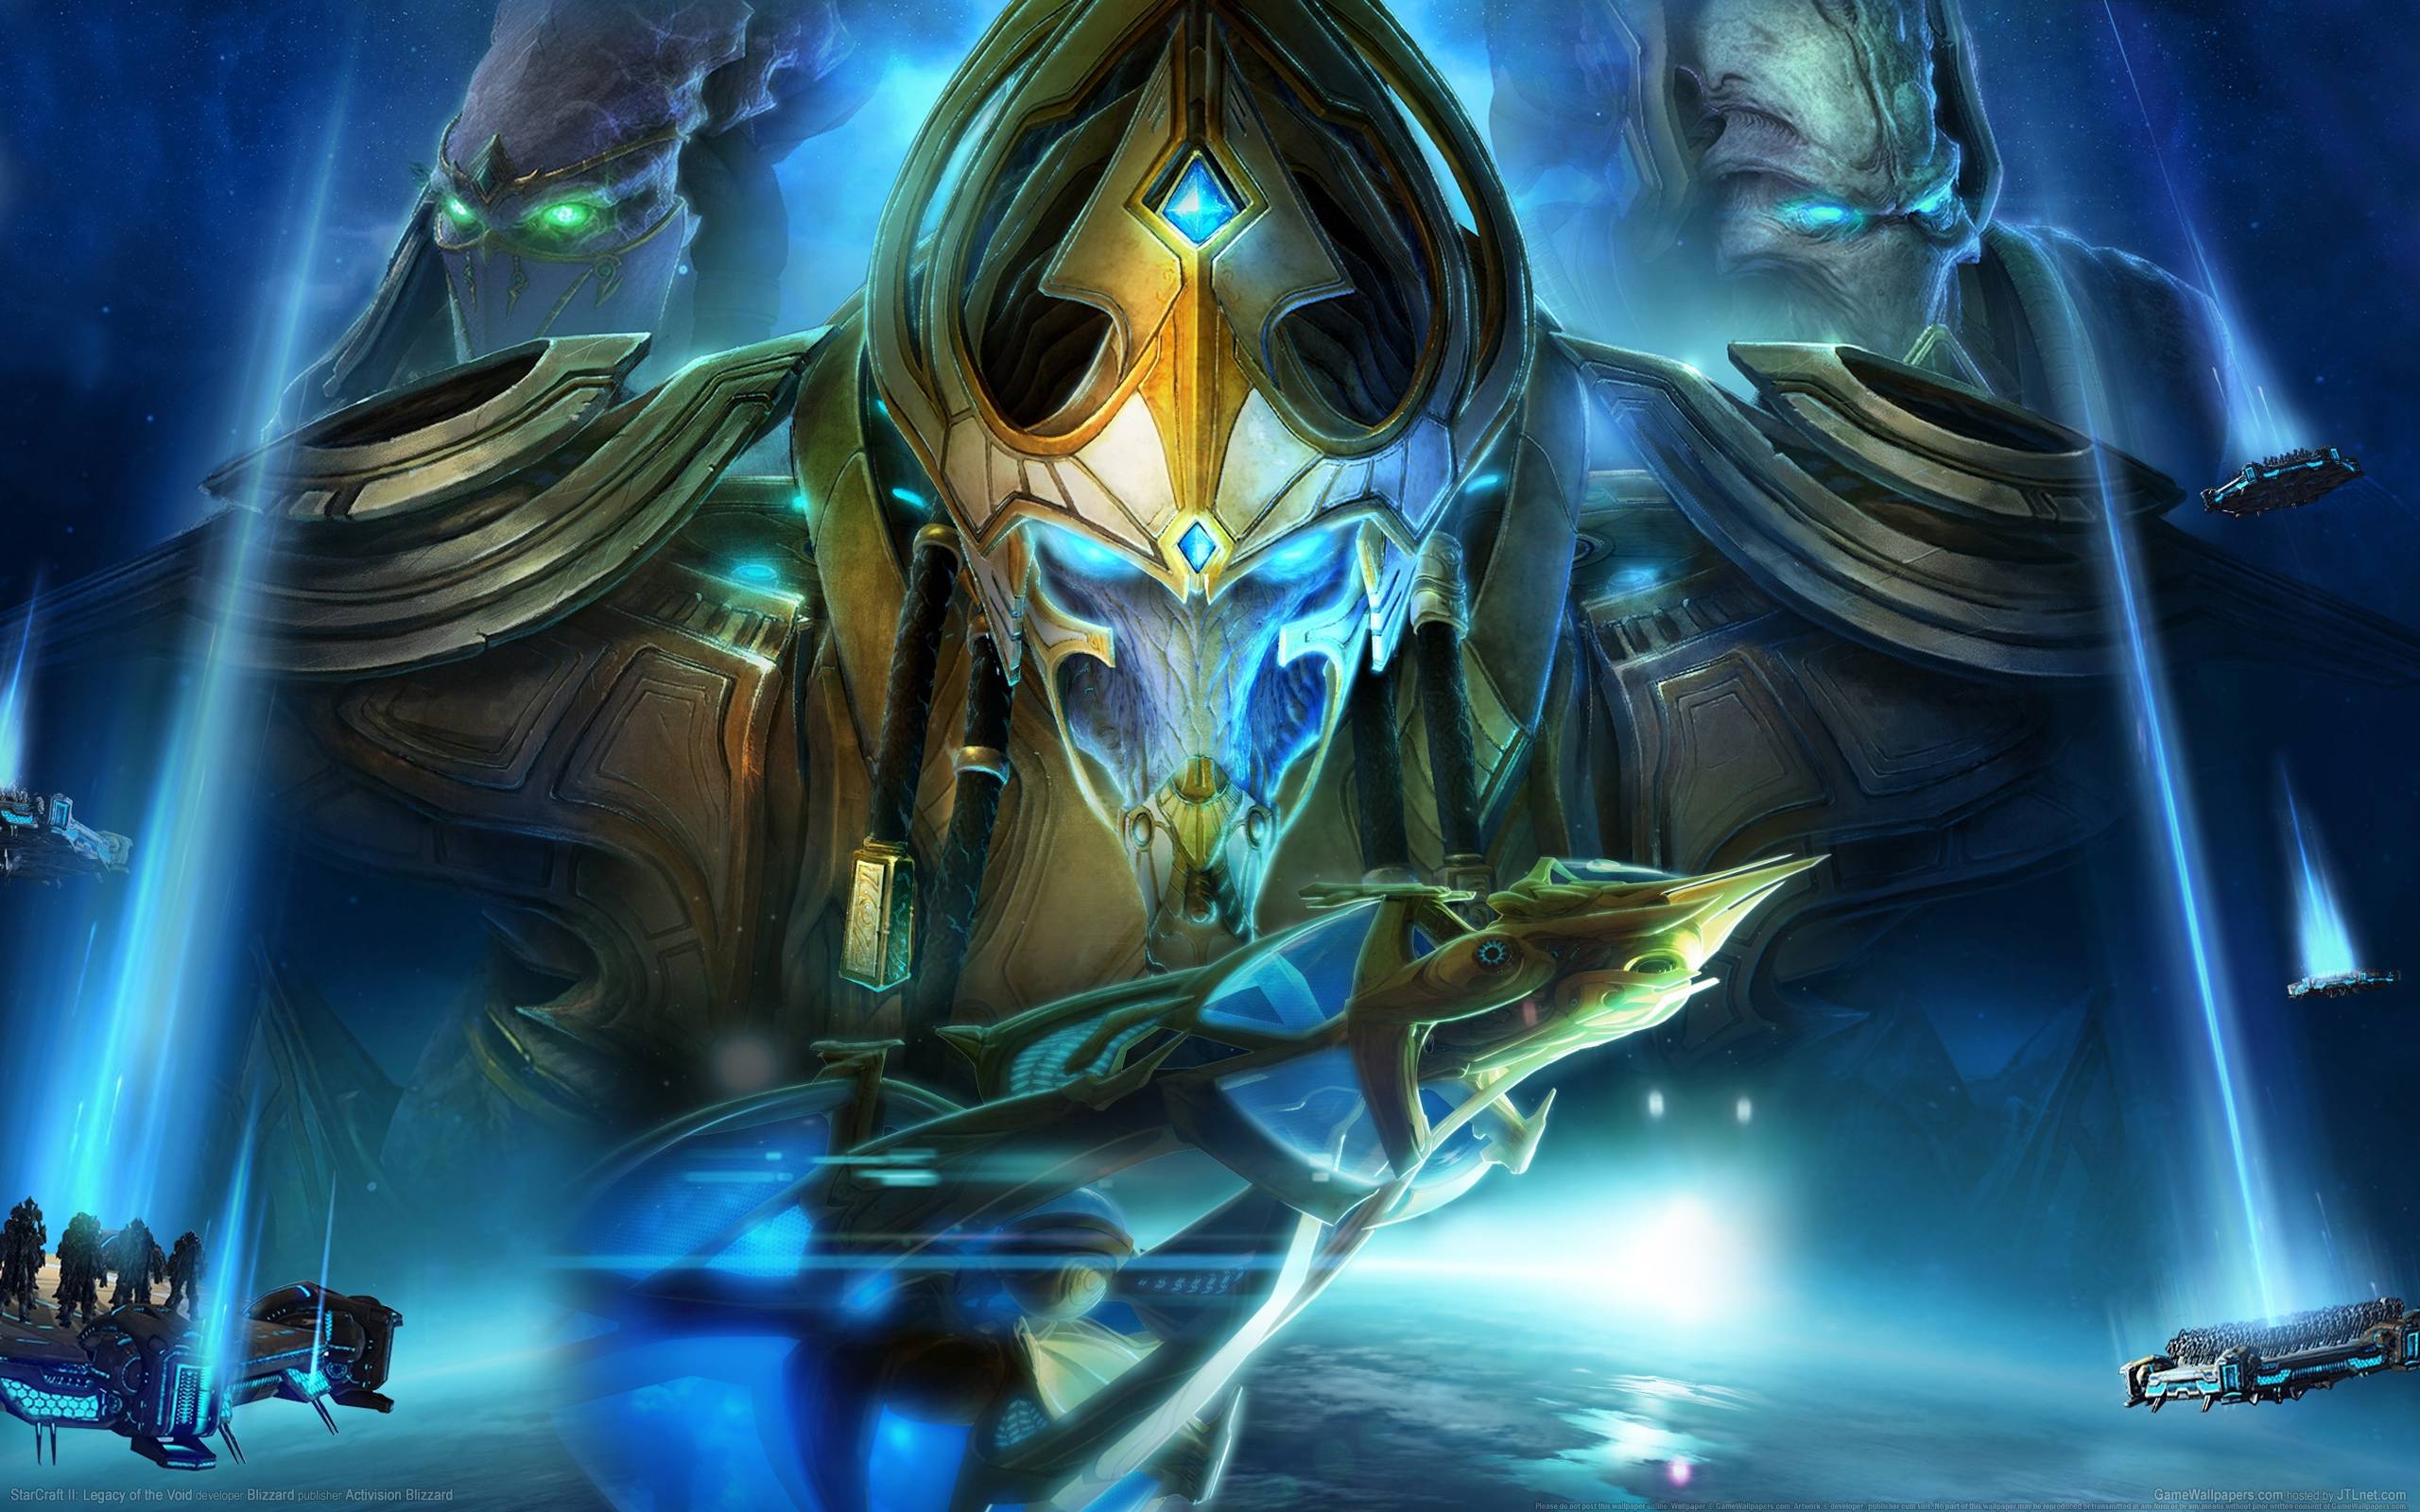 Does Anyone Have A Version Of The Lotv Wallpaper